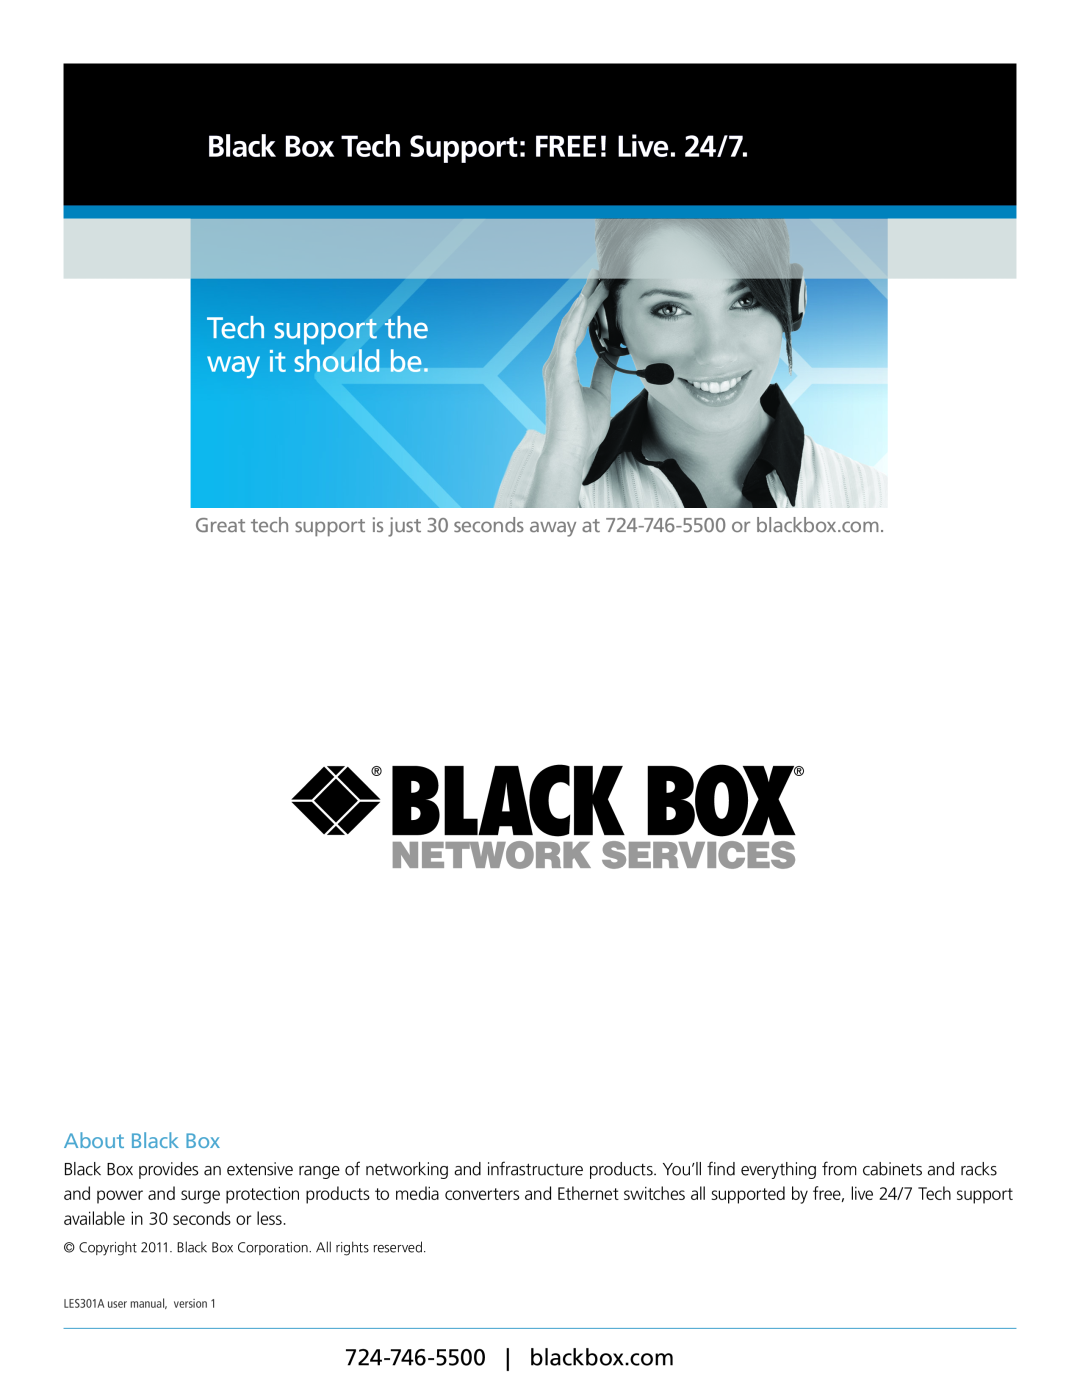 Black Box RS-422, RS-232 Black Box Tech Support FREE! Live. 24/7, Tech support the way it should be, About Black Box 